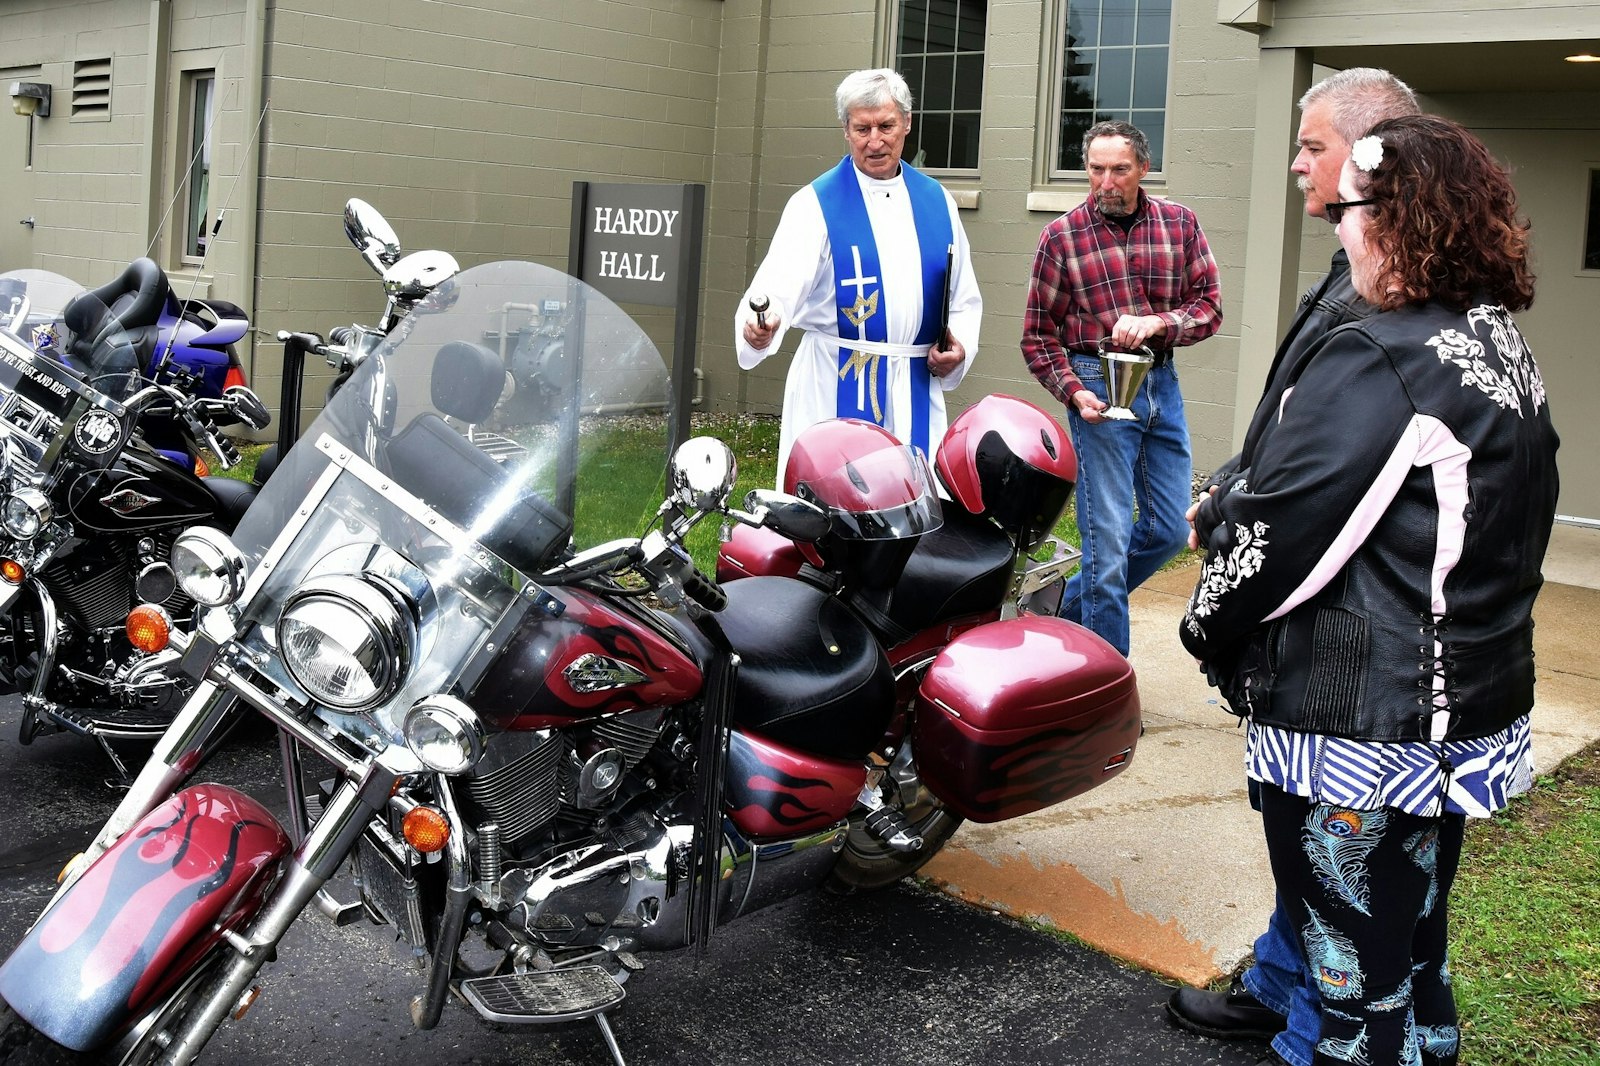 Fr. Frawley blesses a motorcycle at St. Anne Parish in Ortonville. The Irish-born priest loved sports, especially golf and hurling, a sport popular in his native country. (Courtesy photo)